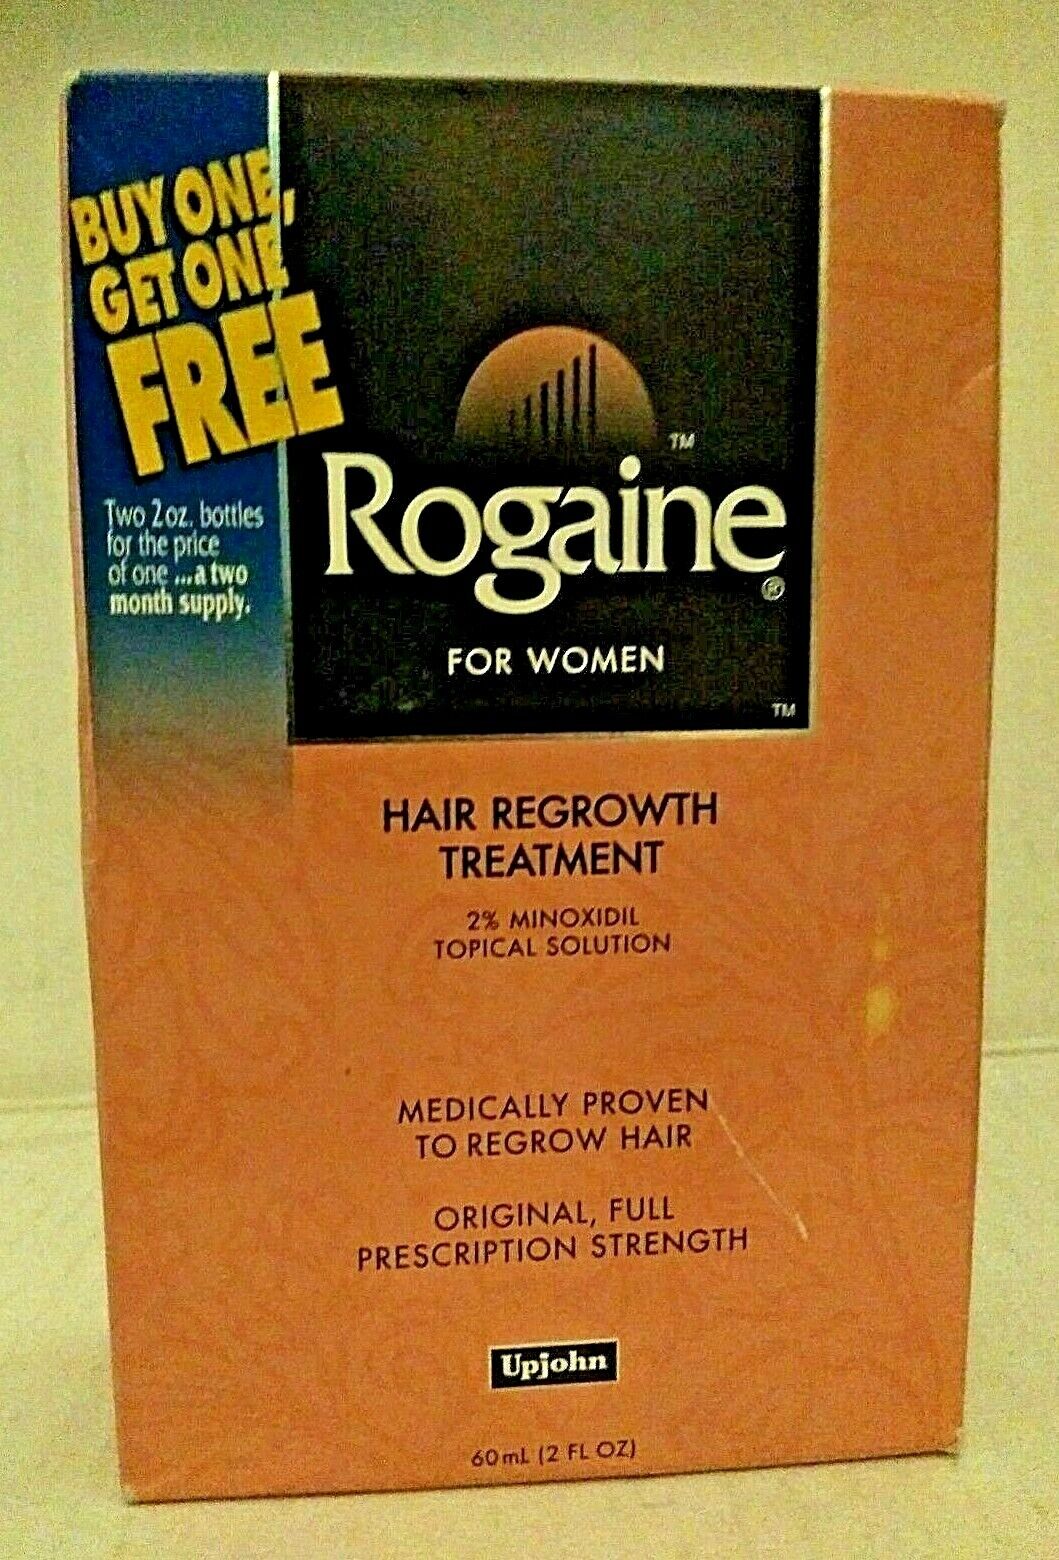 Women's Vintage Rare Rogaine 2% Minoxidil Topical Solution 2 Months Supply 120mL